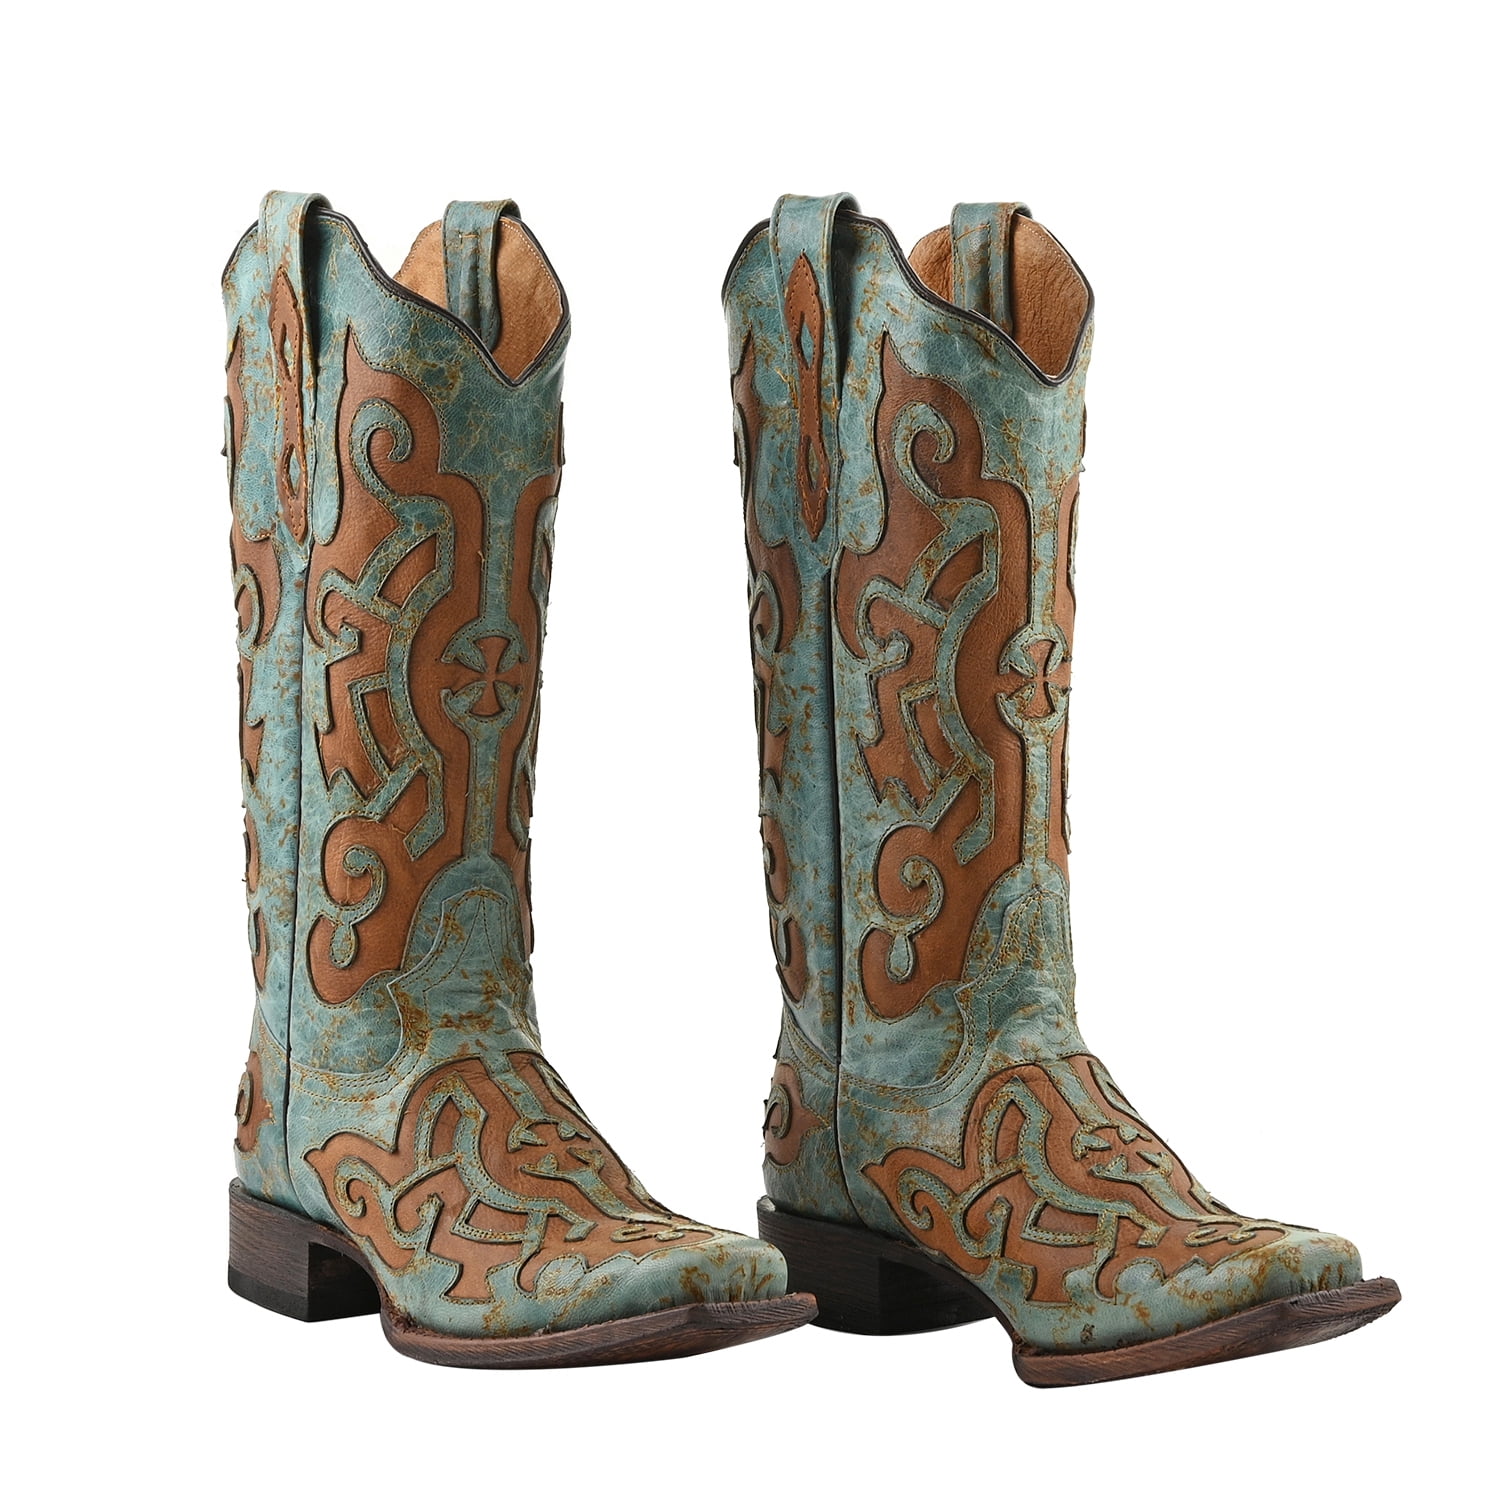 LC TANNER 100% Genuine Leather Square Toe Boot with Glitter Lace Design - Turquoise/Cognac - Size 10 - Walmart.com